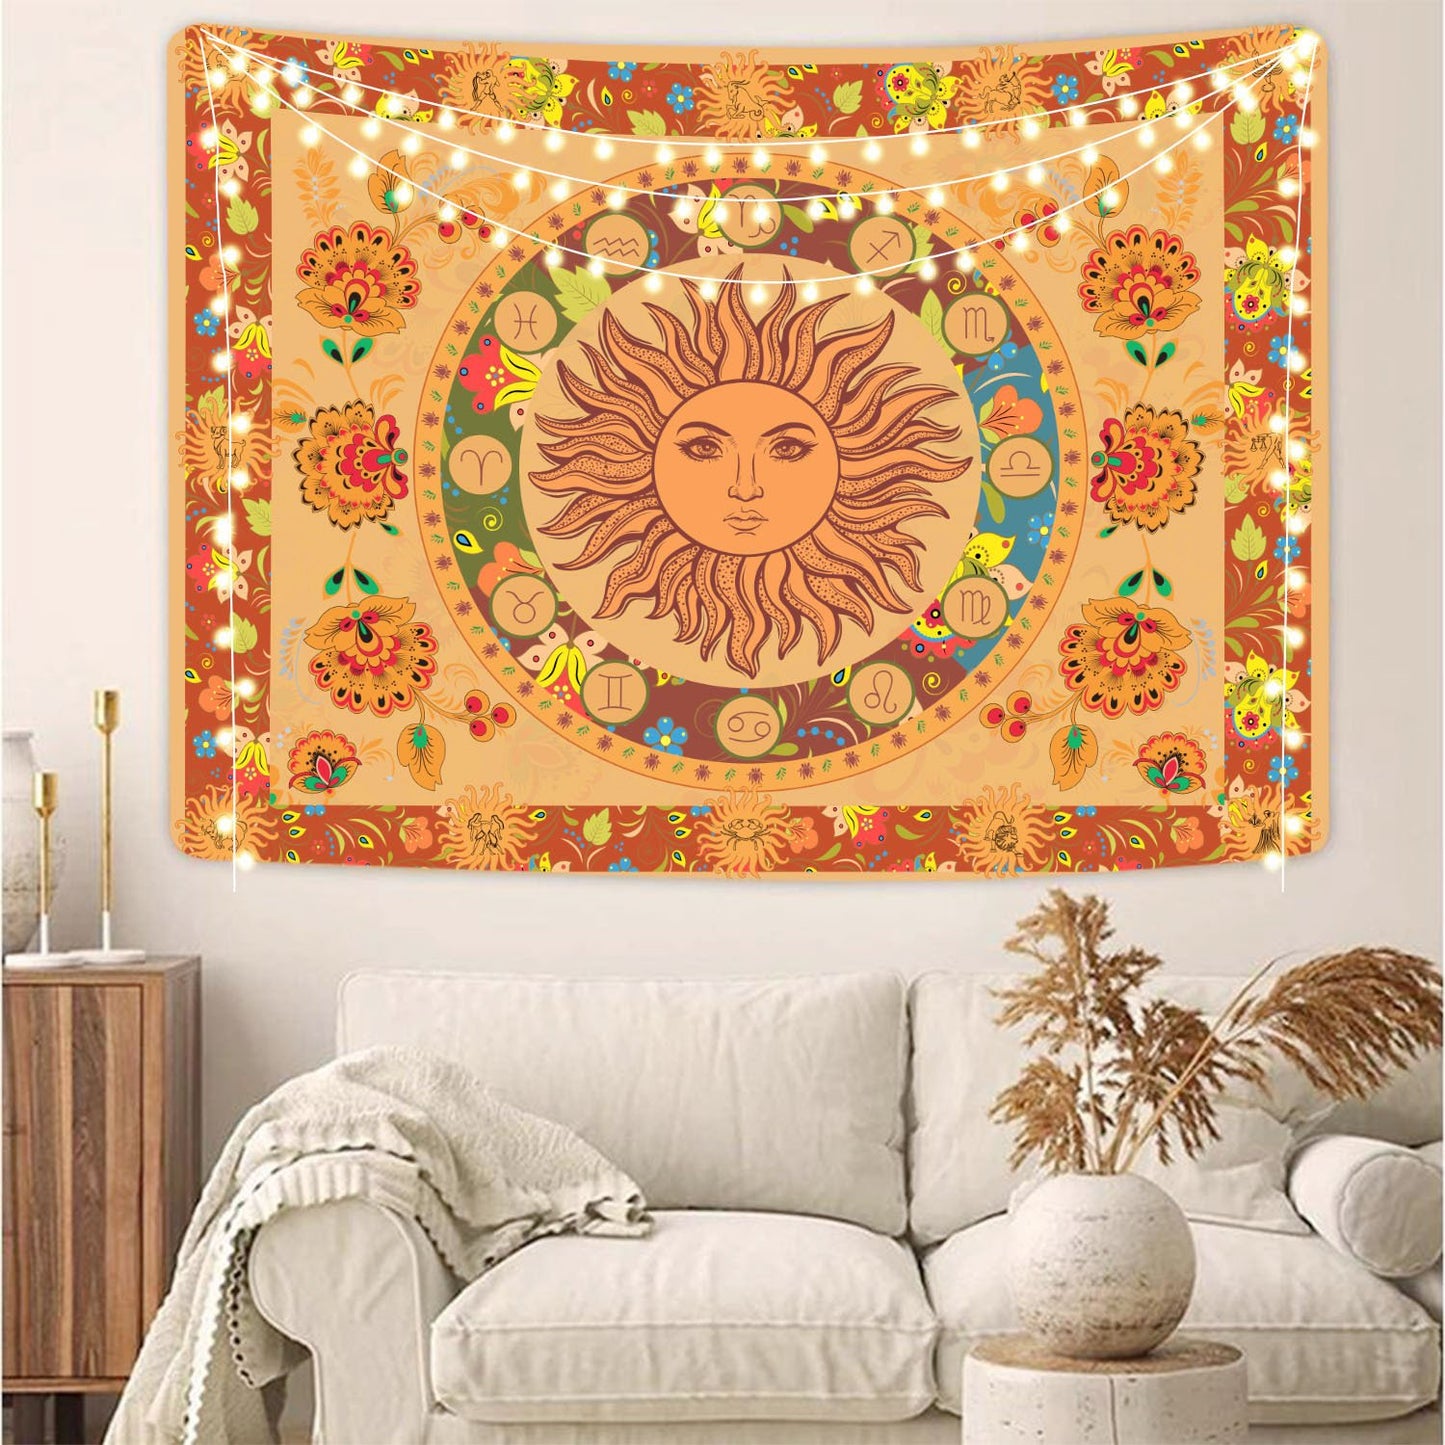 Goddess Sun Decorative Hanging Wall Tapestry-LS-BKTY001-150x130-Free Shipping at meselling99